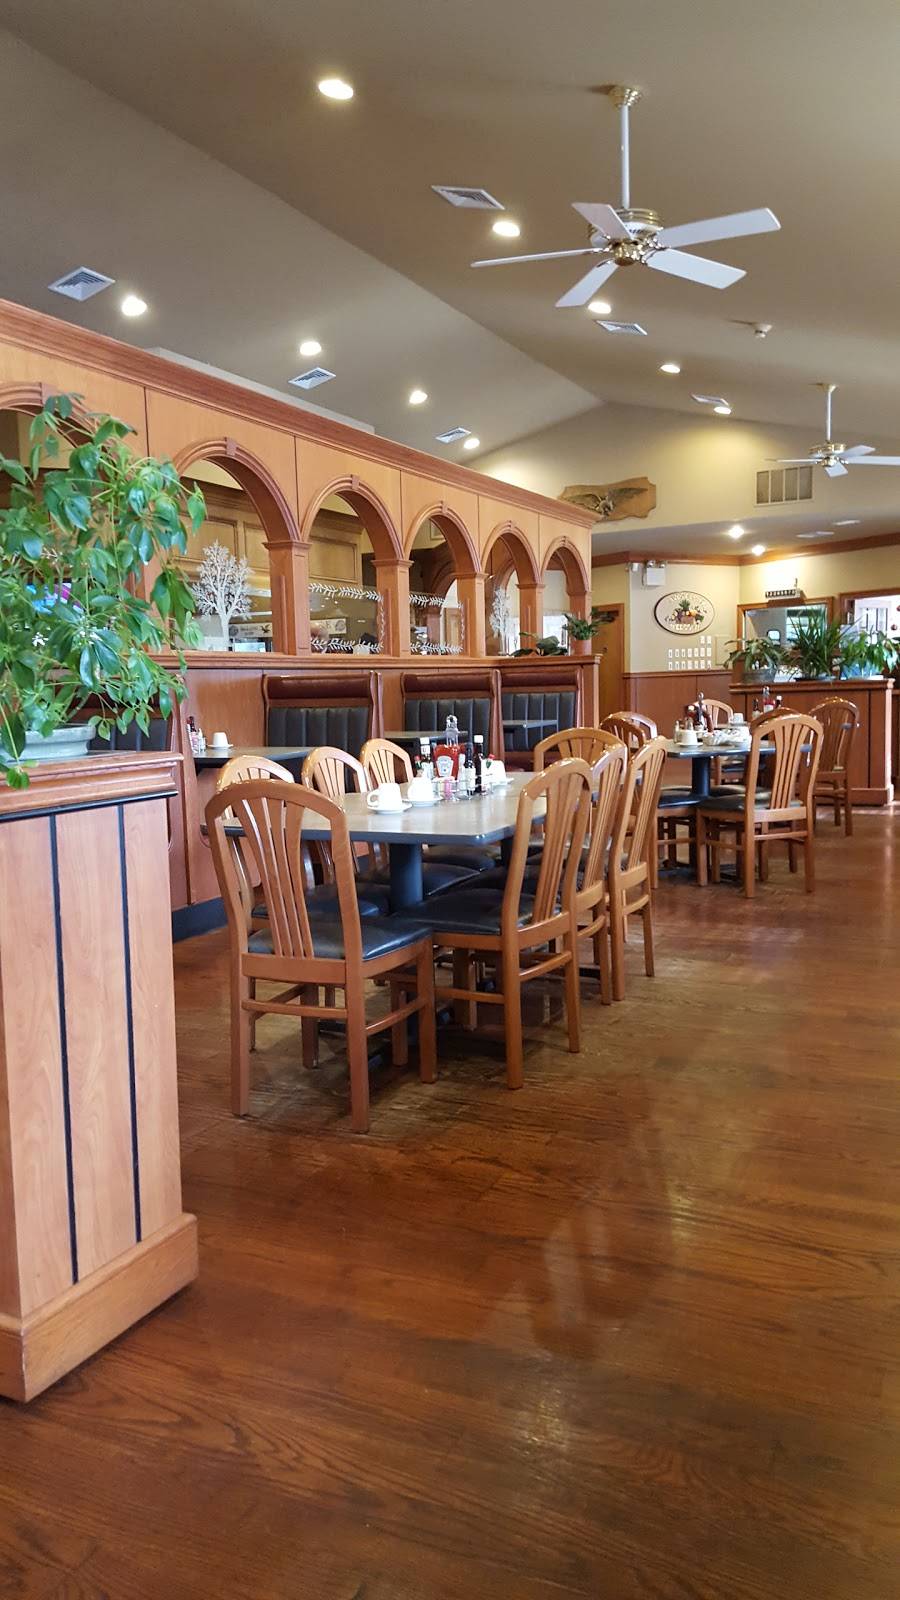 The Brass Eagle Restaurant | restaurant | 9635, 5725 Lincoln Hwy, Gap, PA 17527, USA | 7174429977 OR +1 717-442-9977